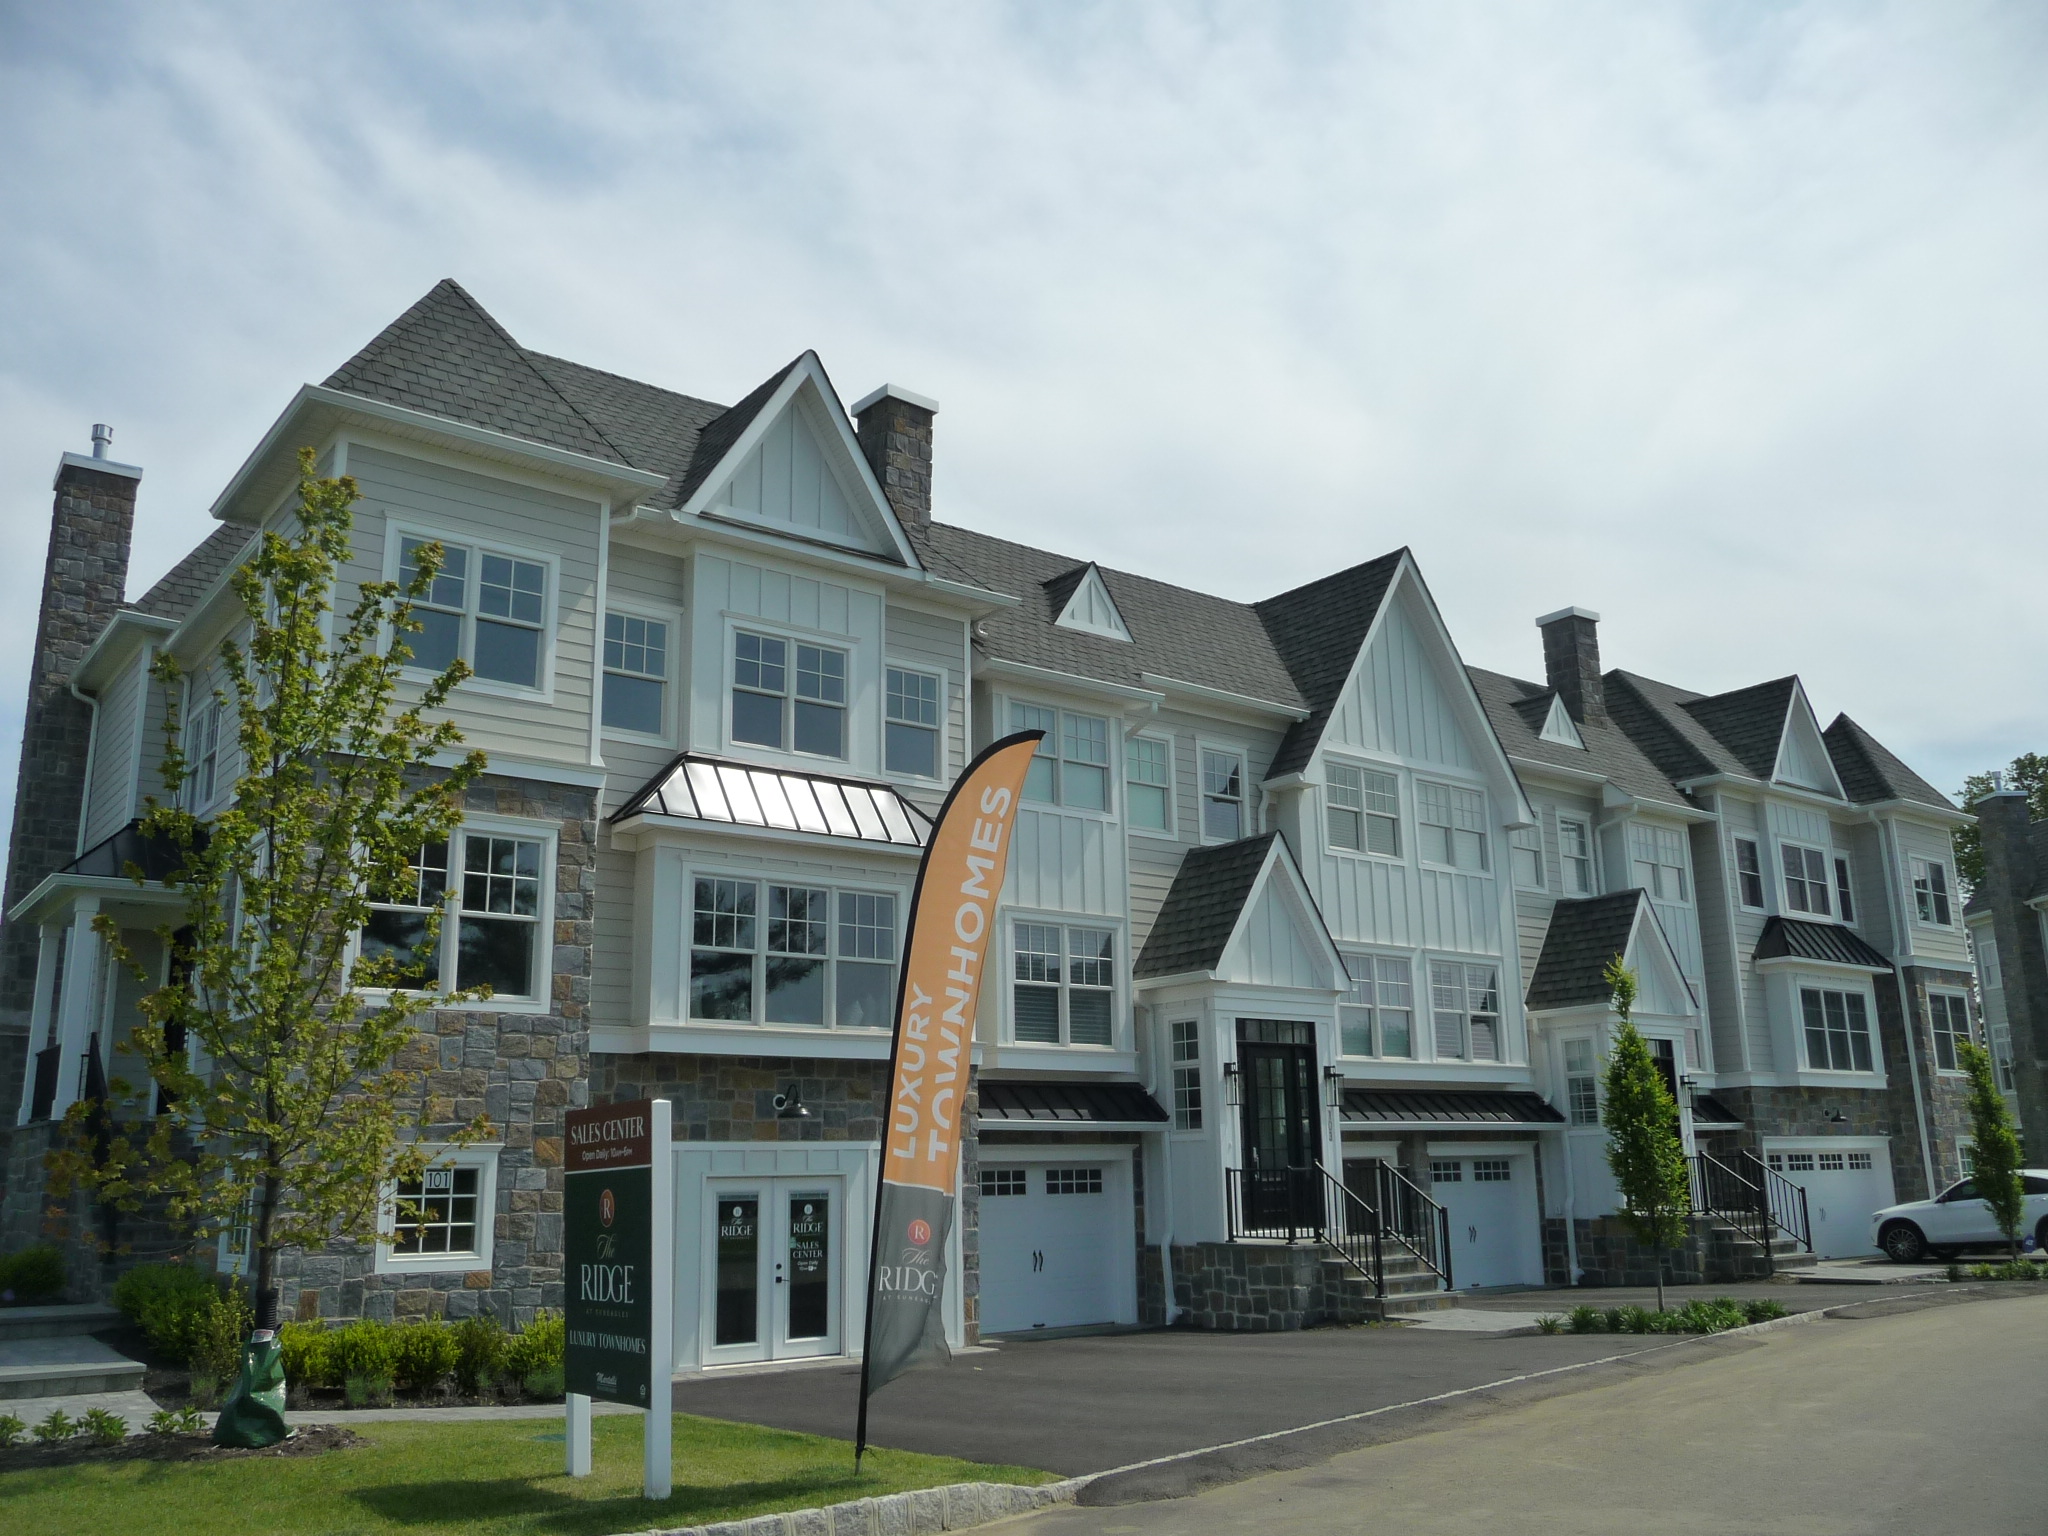 A row of townhouses at The Ridge at Suneagles in Eatontown, NJ.